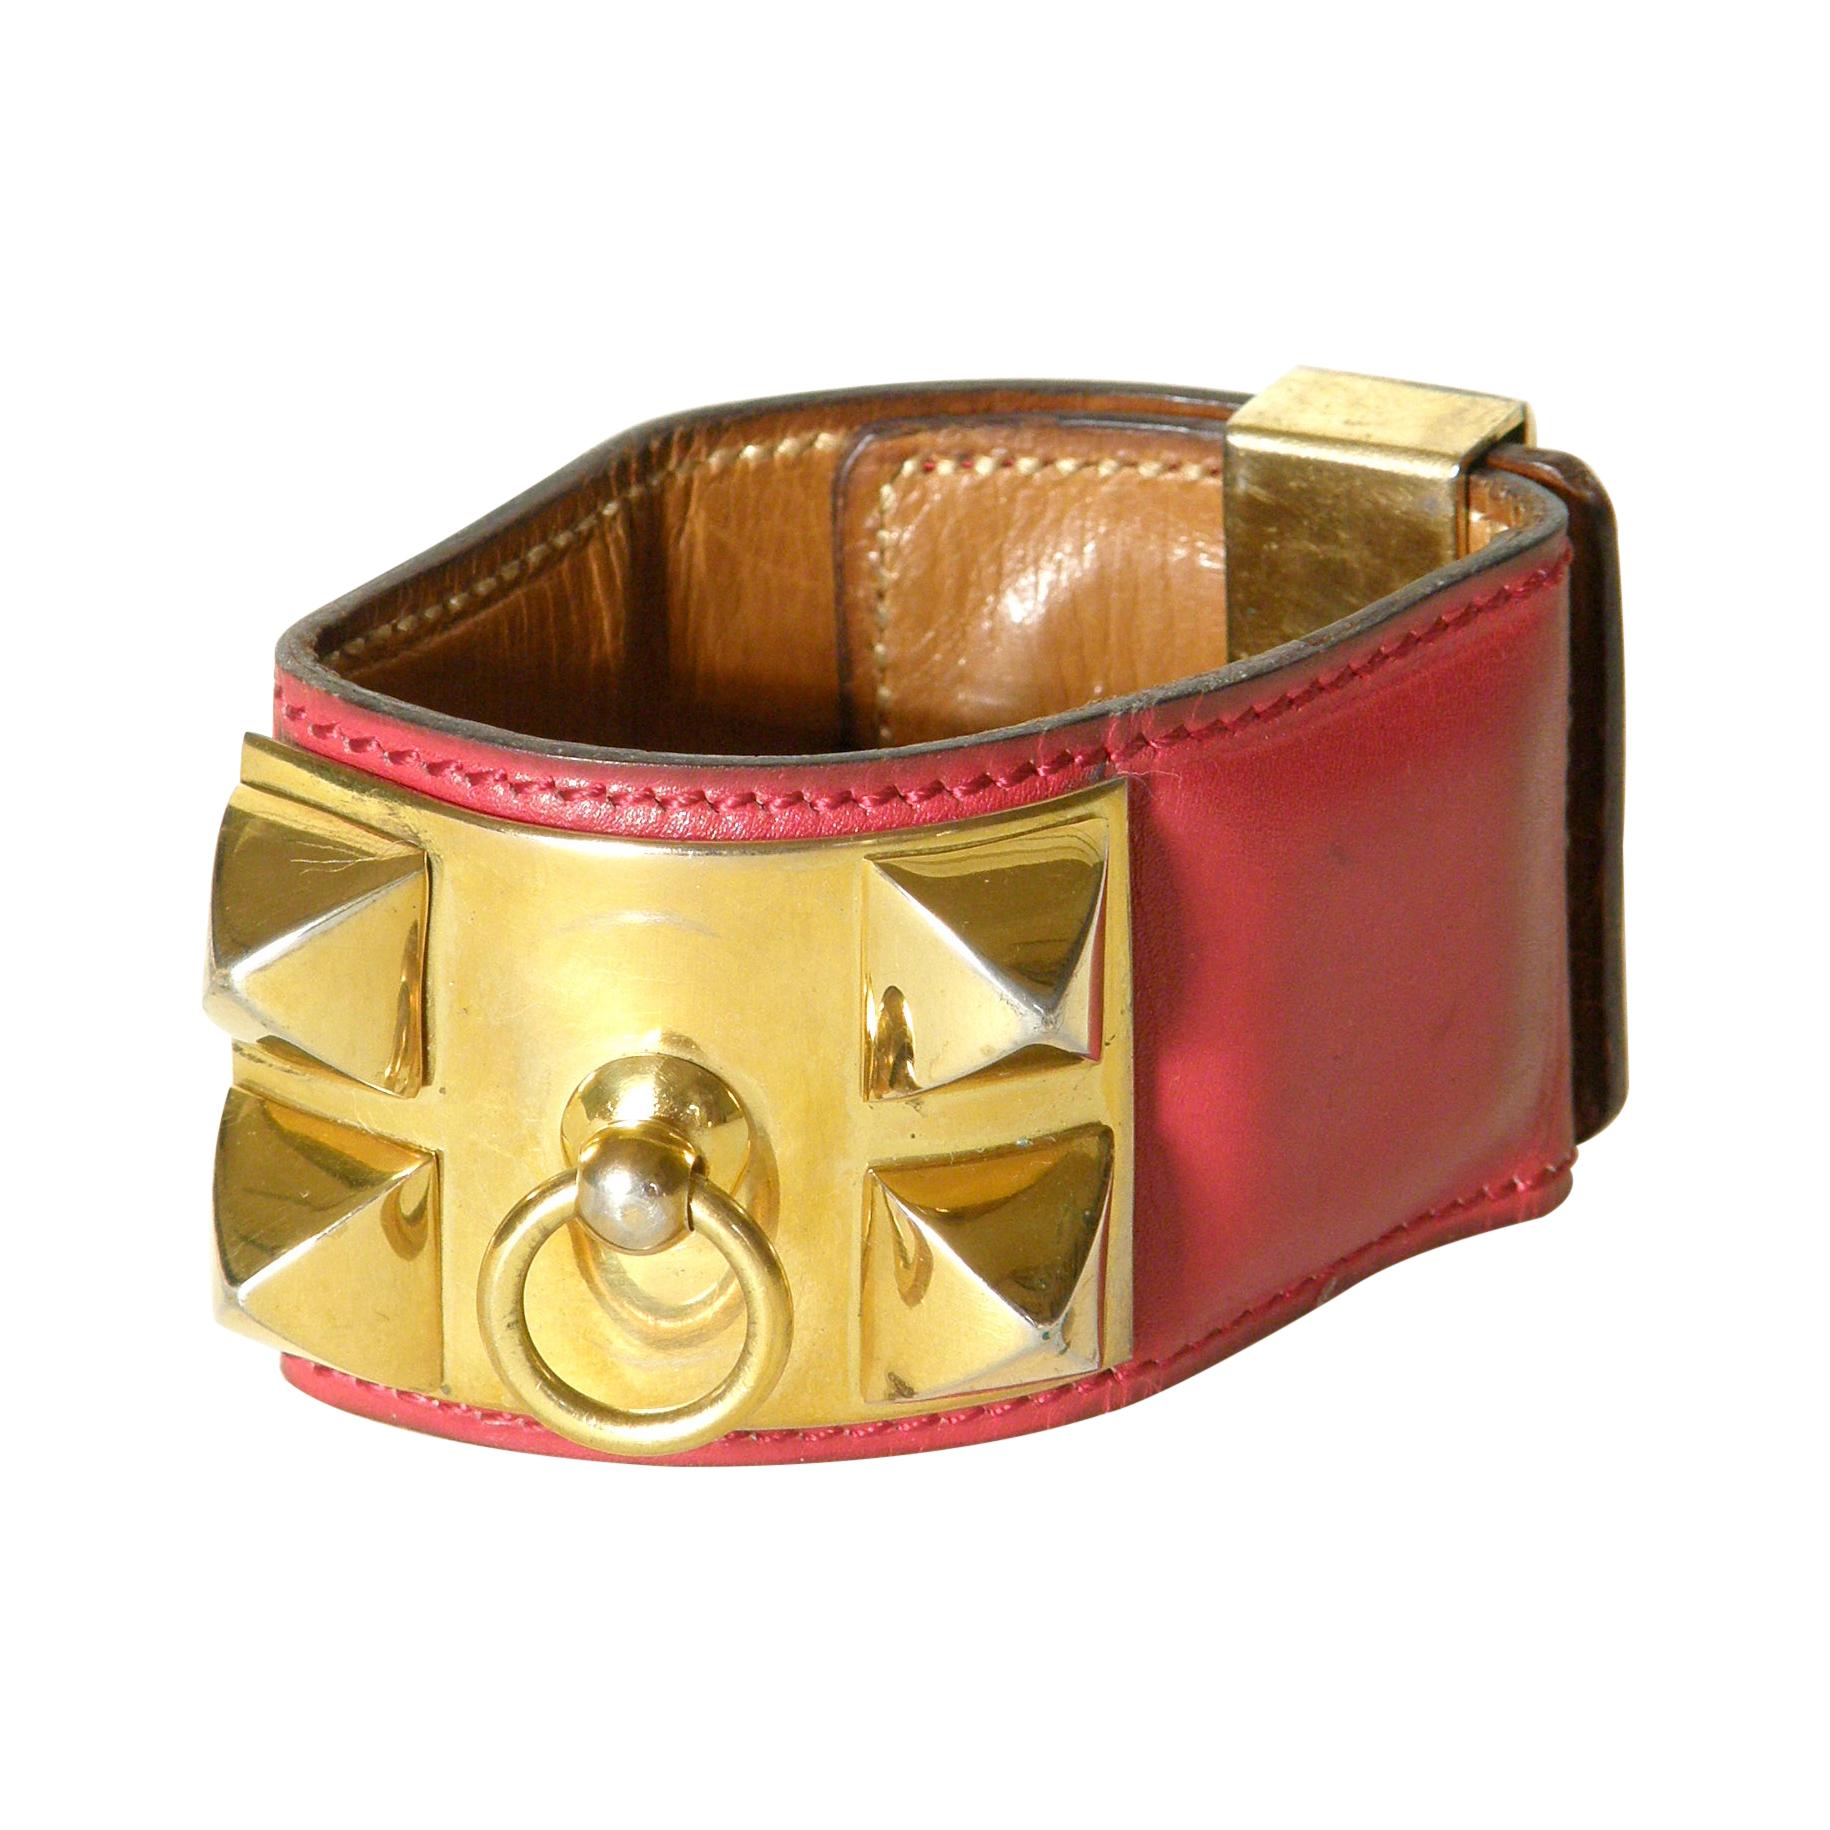 Early Hermès Collier de Chien Cuff Bracelet Red Leather CDC with Gold Hardware